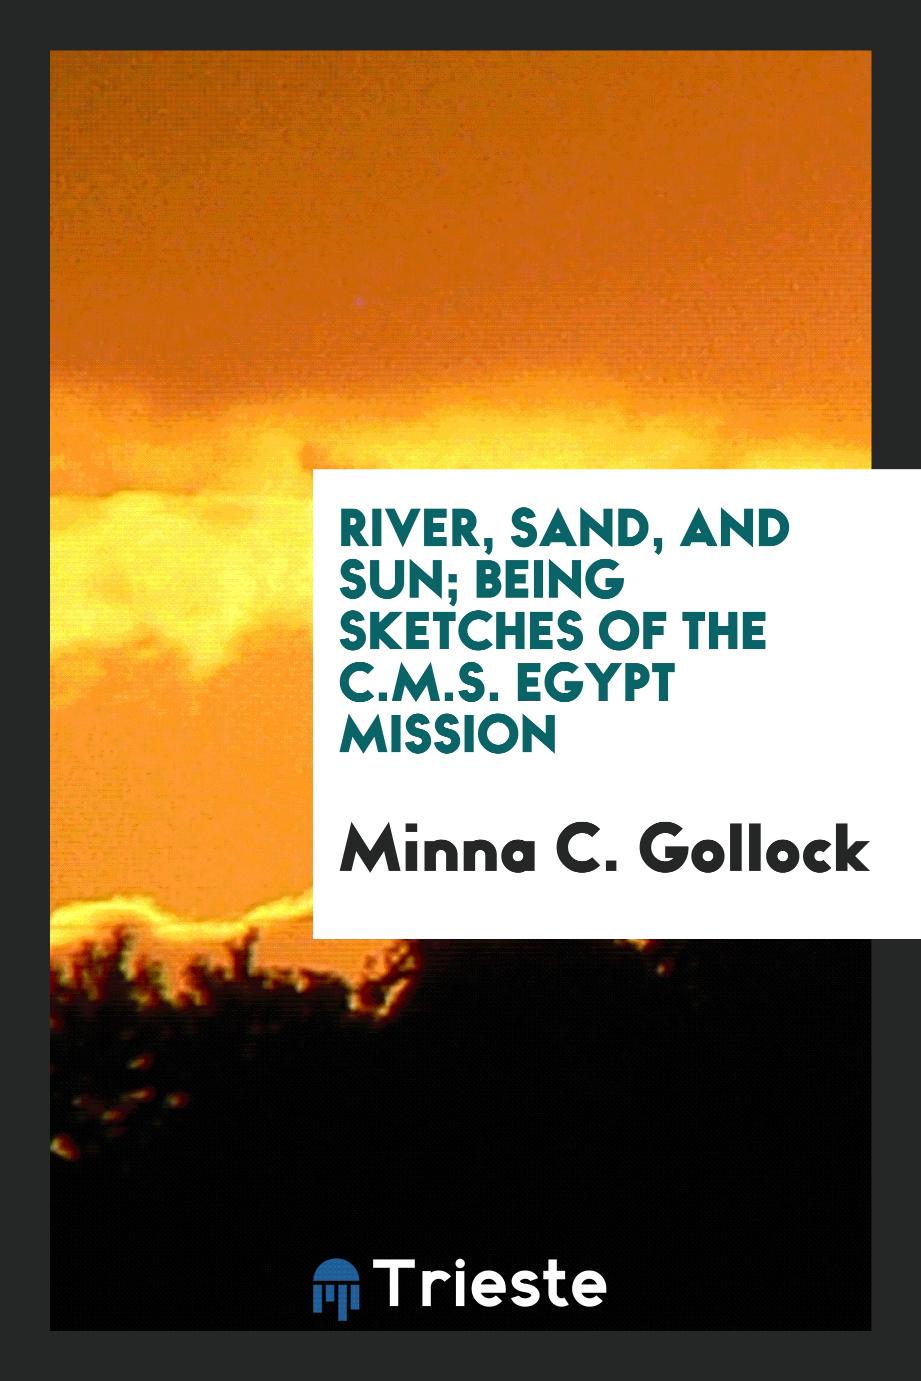 River, sand, and sun; Being sketches of the C.M.S. Egypt Mission